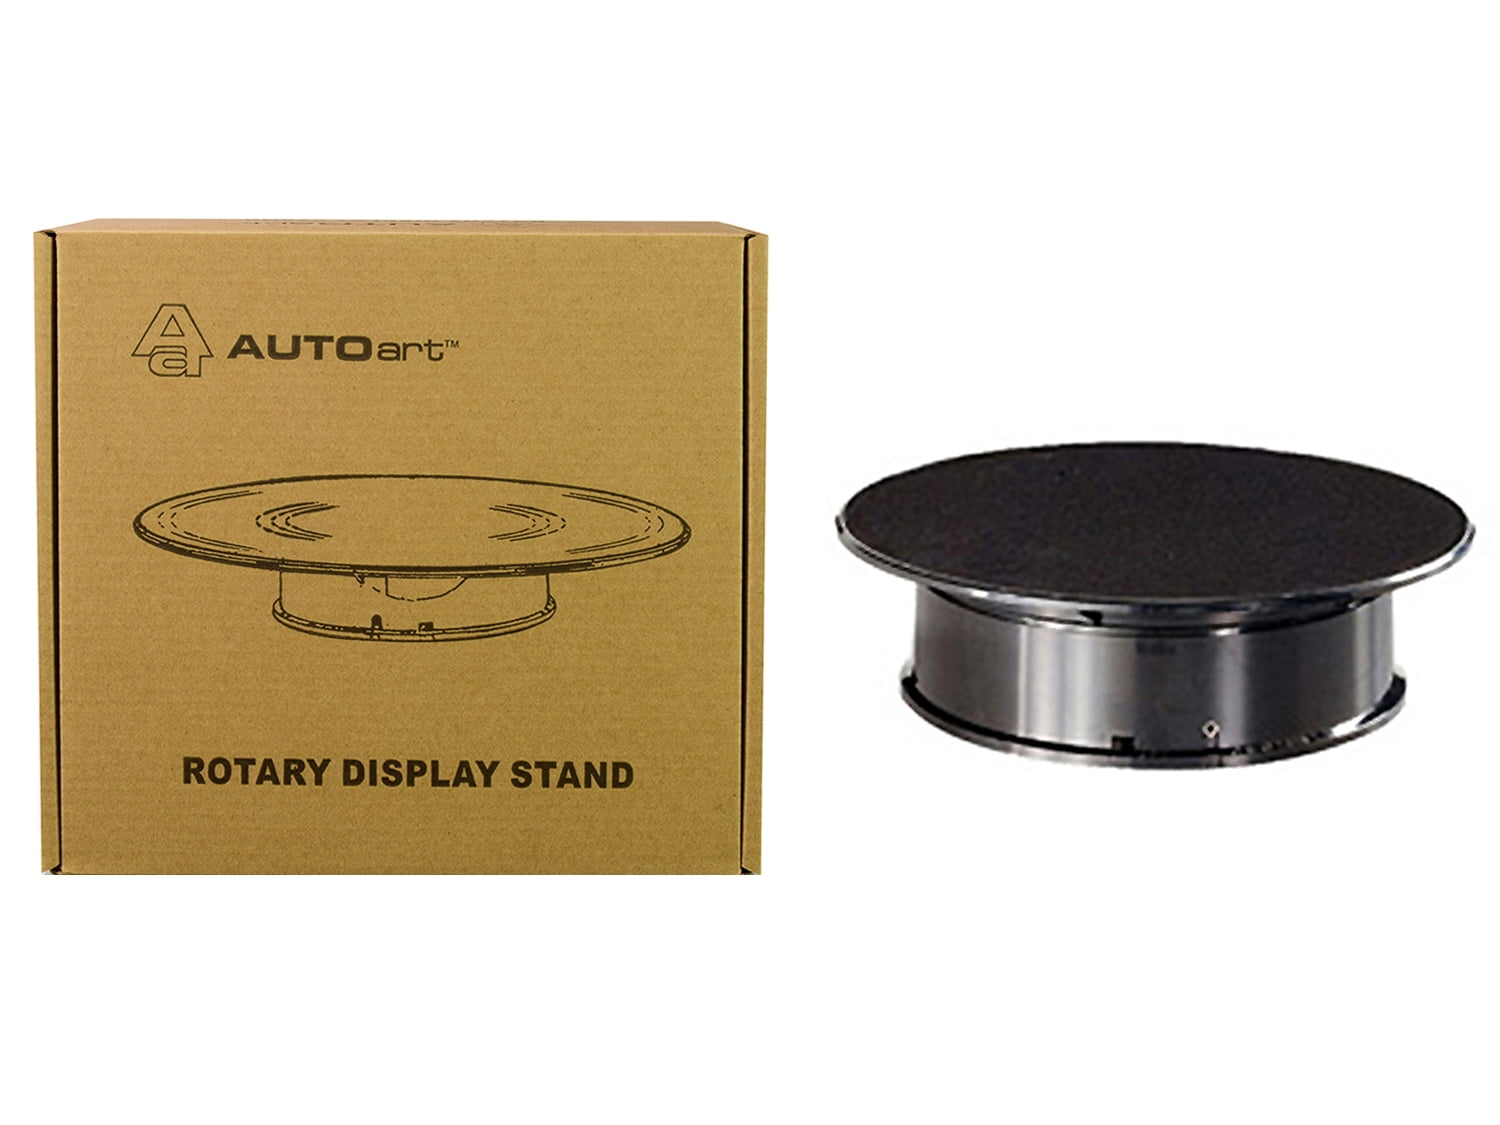 98017 8 in. Rotary Display Turntable Stand with Small Top For 1 by 16 4, 1 by 43, 1 by 32, 1 by 24 Scale Models, Black -  AUTOART